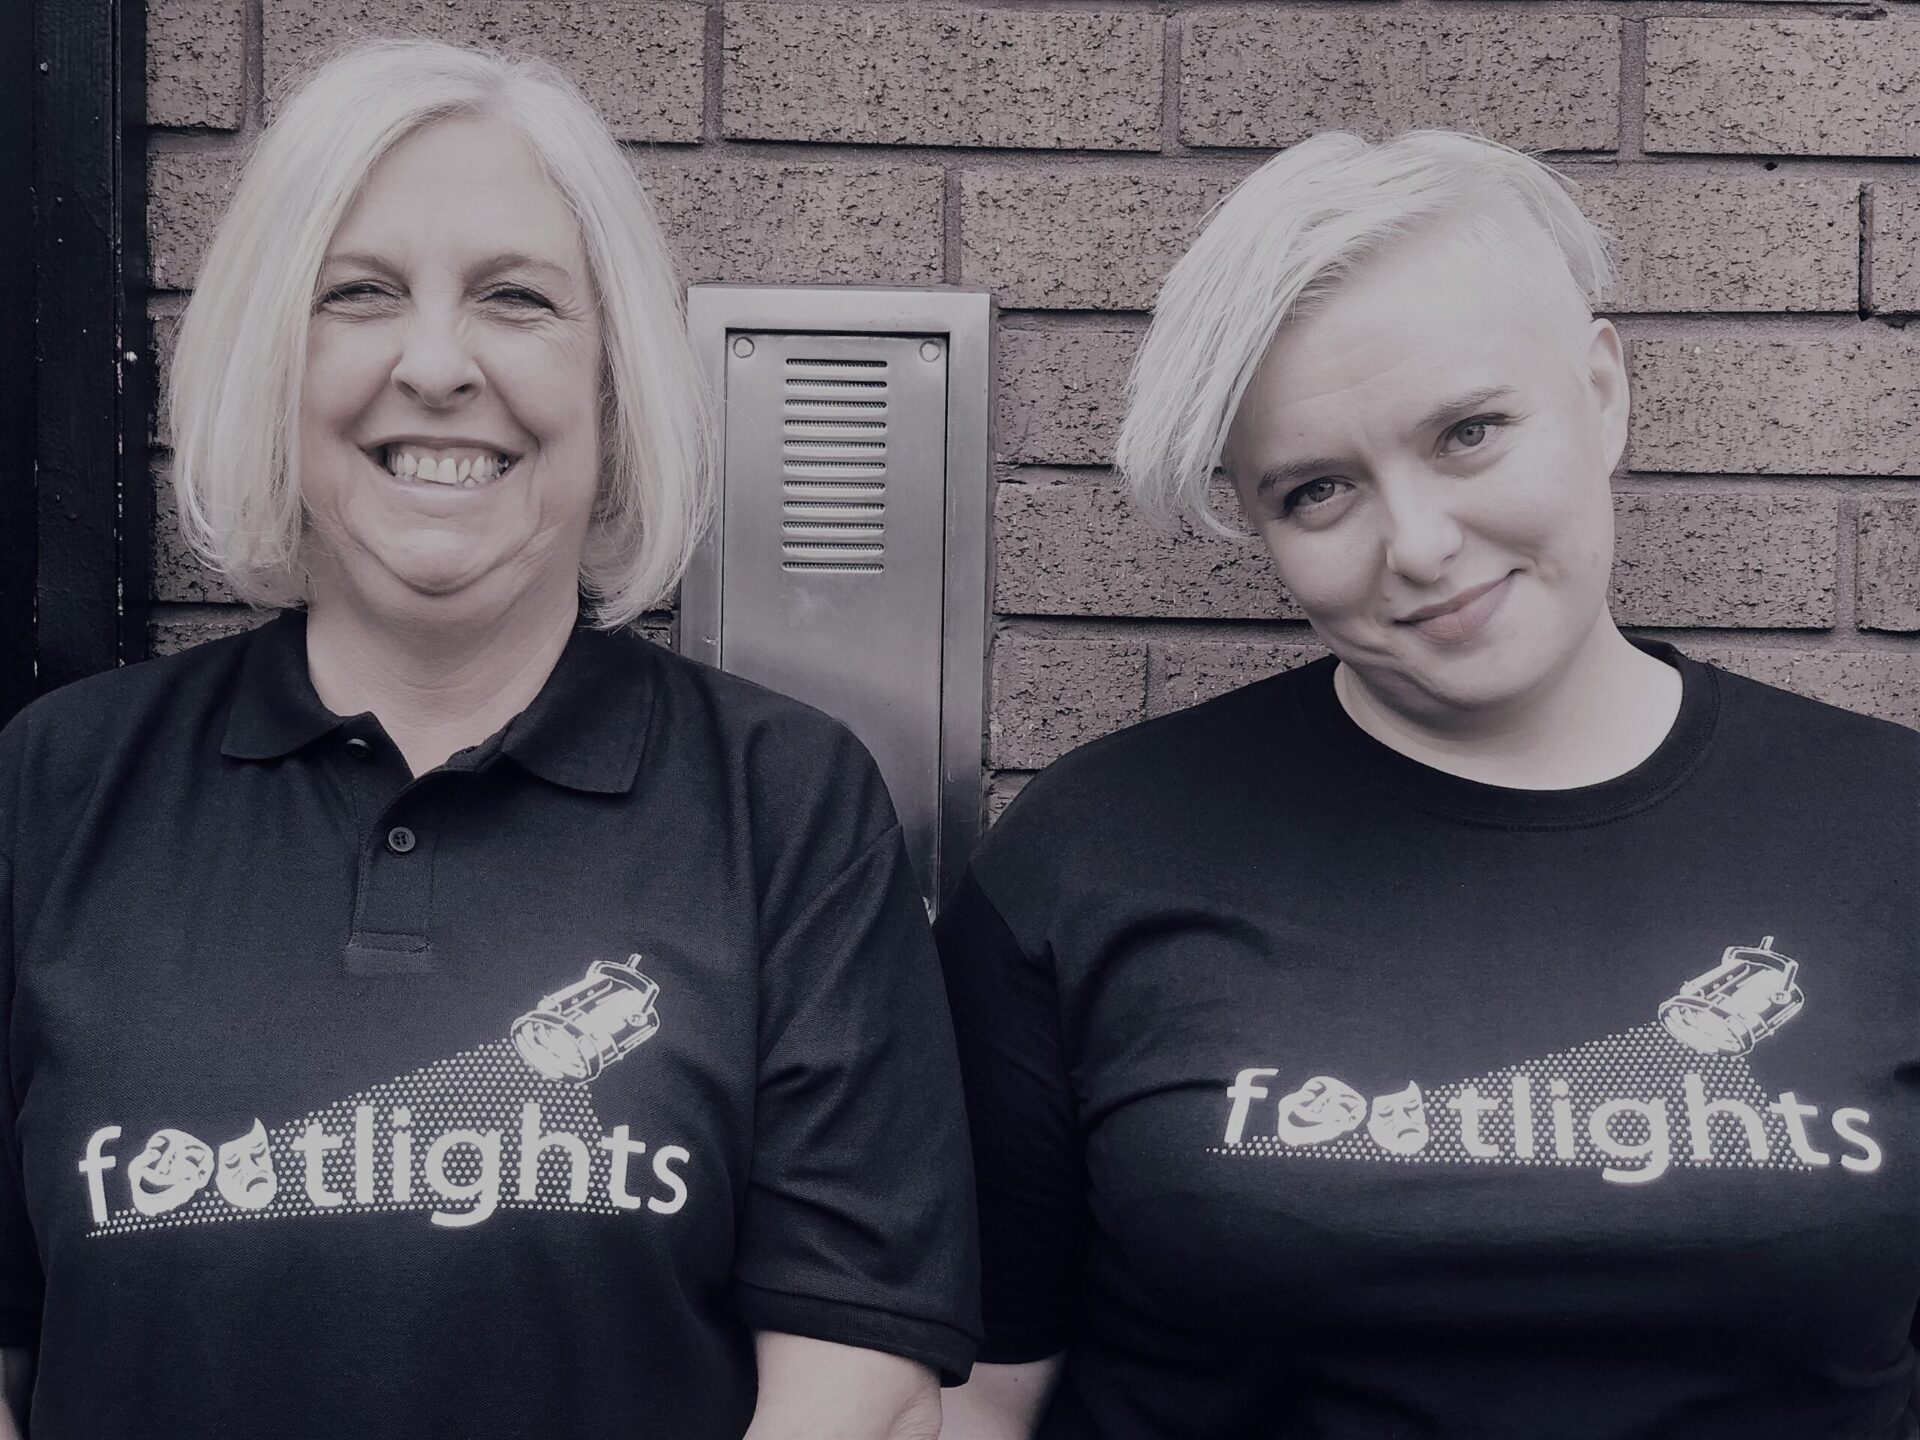 Footlights’ latest franchisee discusses opening a franchise weeks before Lockdown